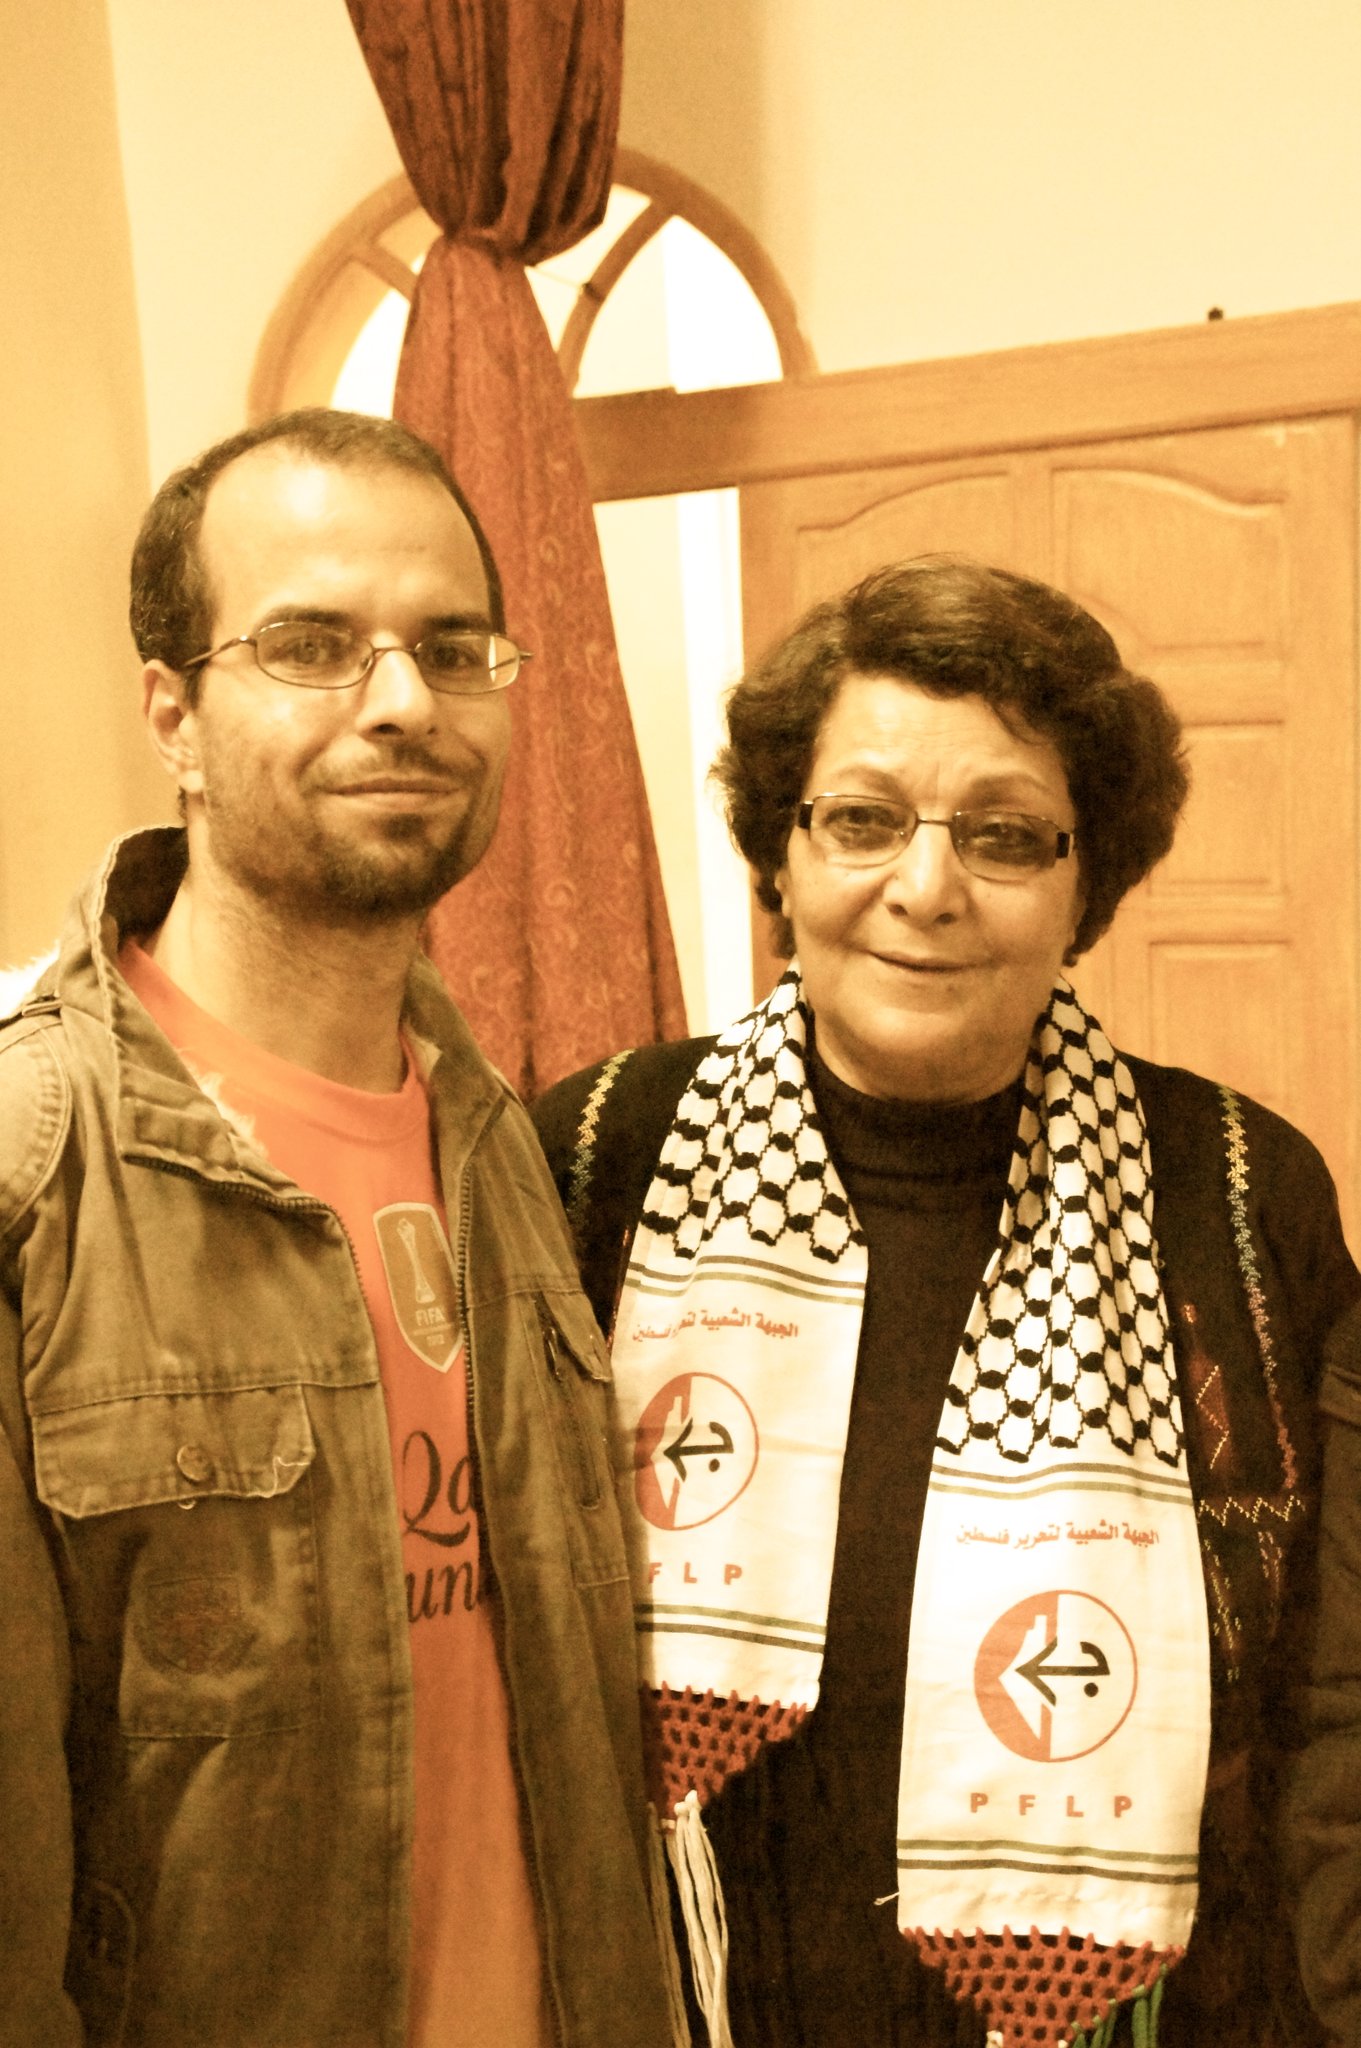 A very happy birthday to our hero, the one and only Leila Khaled! 